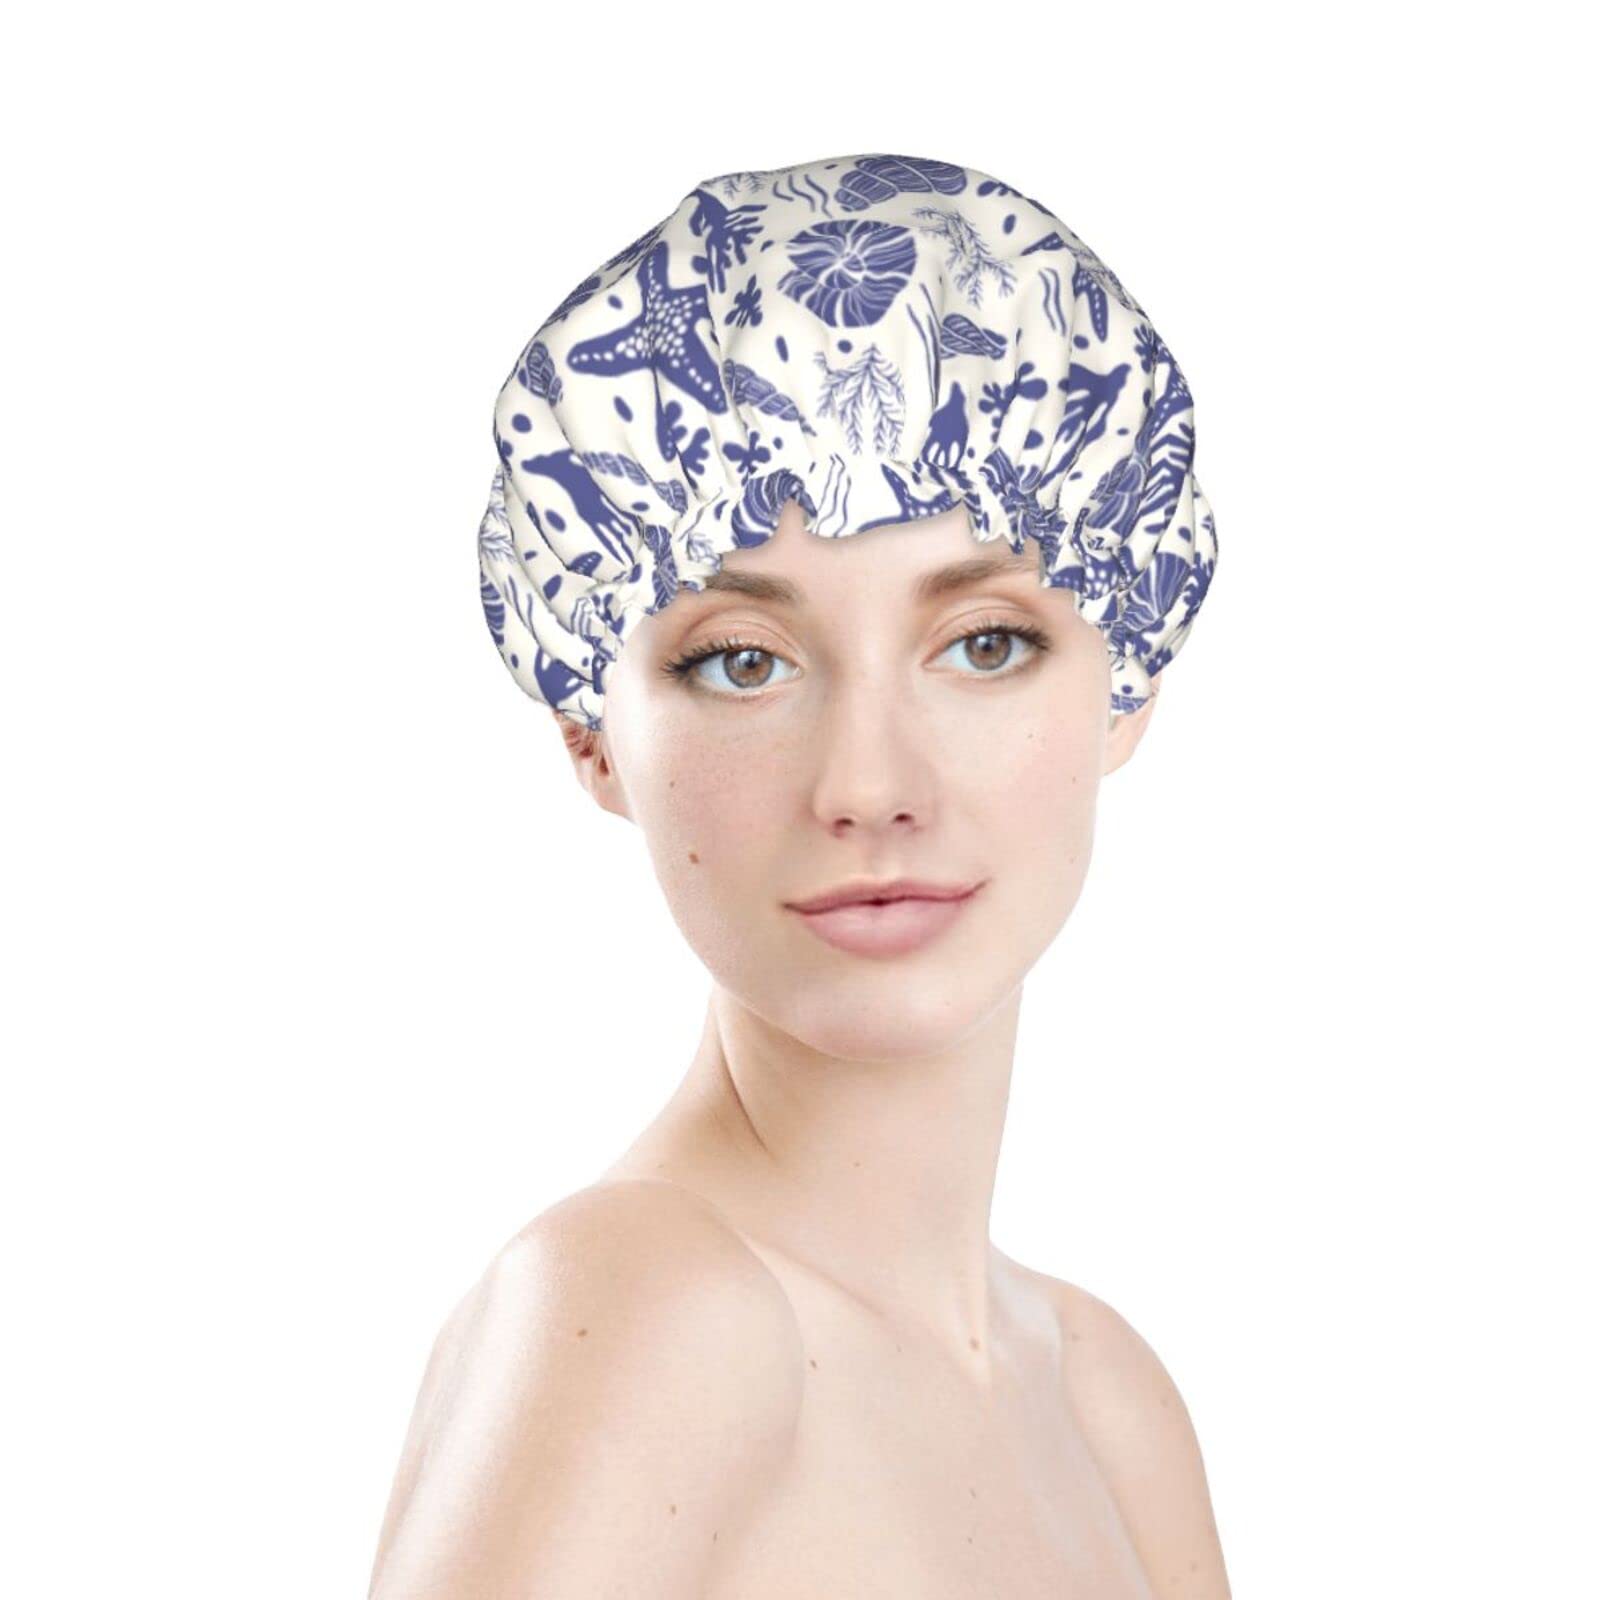 Seashore Elements Reusable Double Waterproof Shower Cap & Bath Cap,Lined,Oversized Waterproof Shower Caps Large Designed for All Hair Lengths with PEVA Lining & Elastic Band Stretch Hem Hair Hat For Women